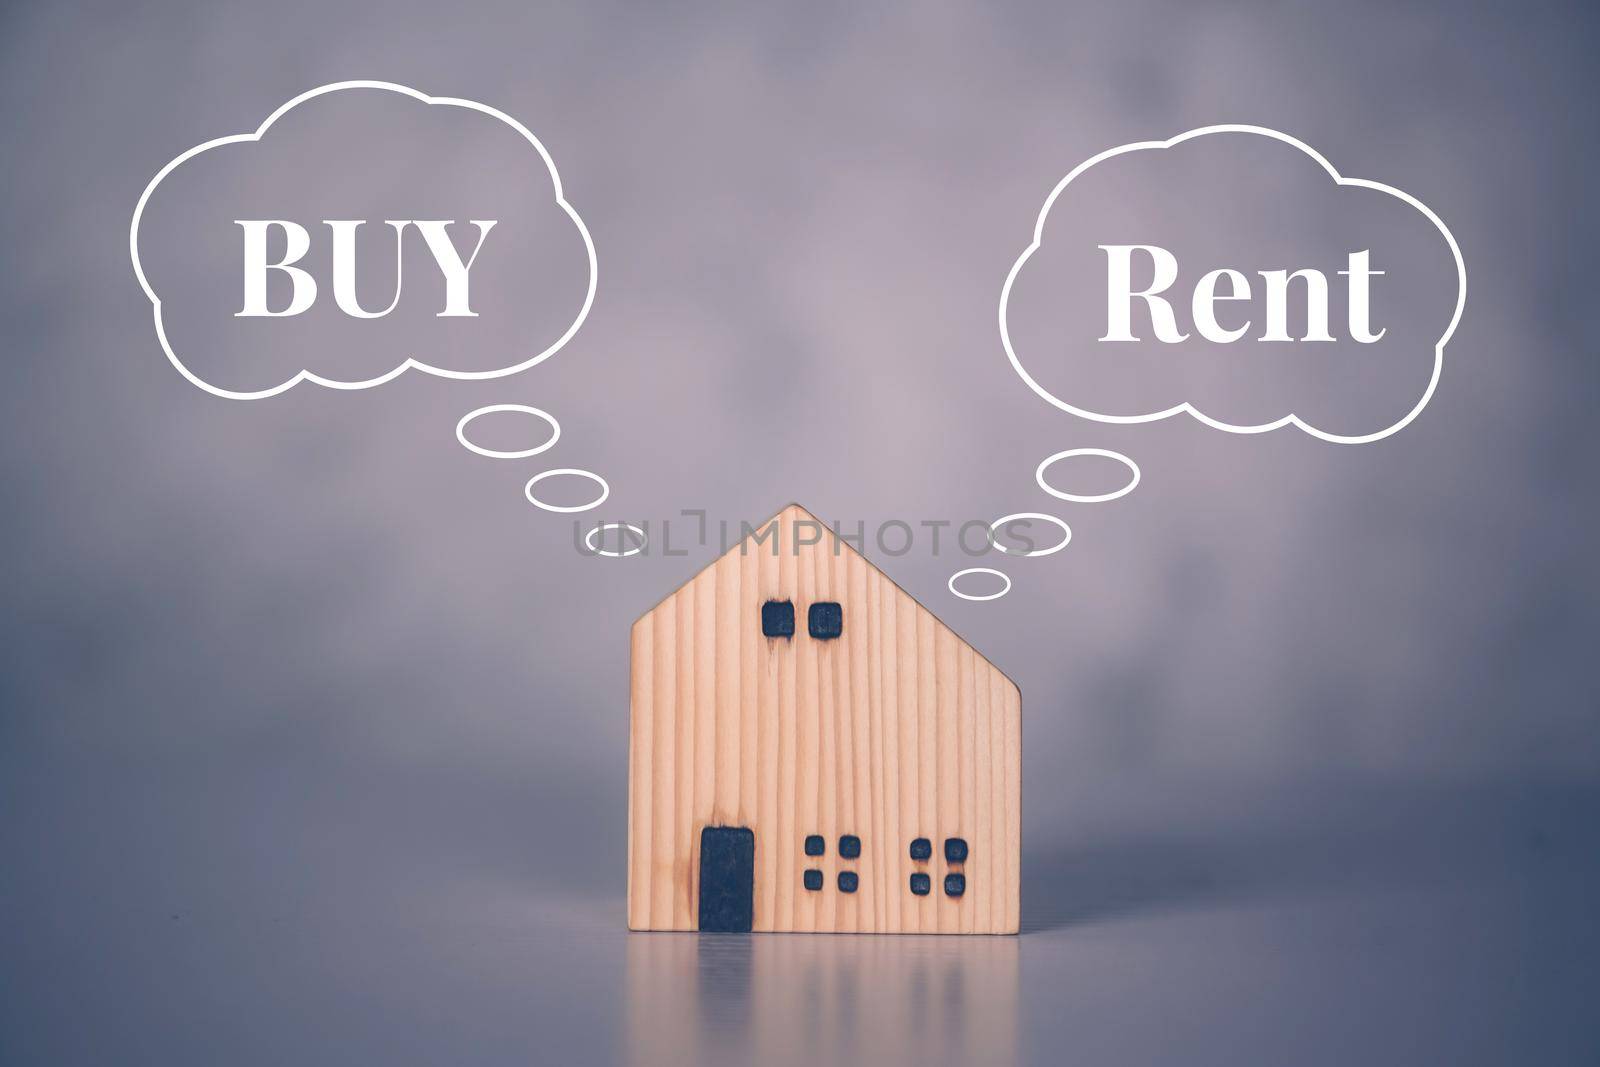 Rent or buy home with real estate for benefits, decision about planning and strategy of house and tax, property with success and saving financial, comparison and advantage, business concept. by nnudoo